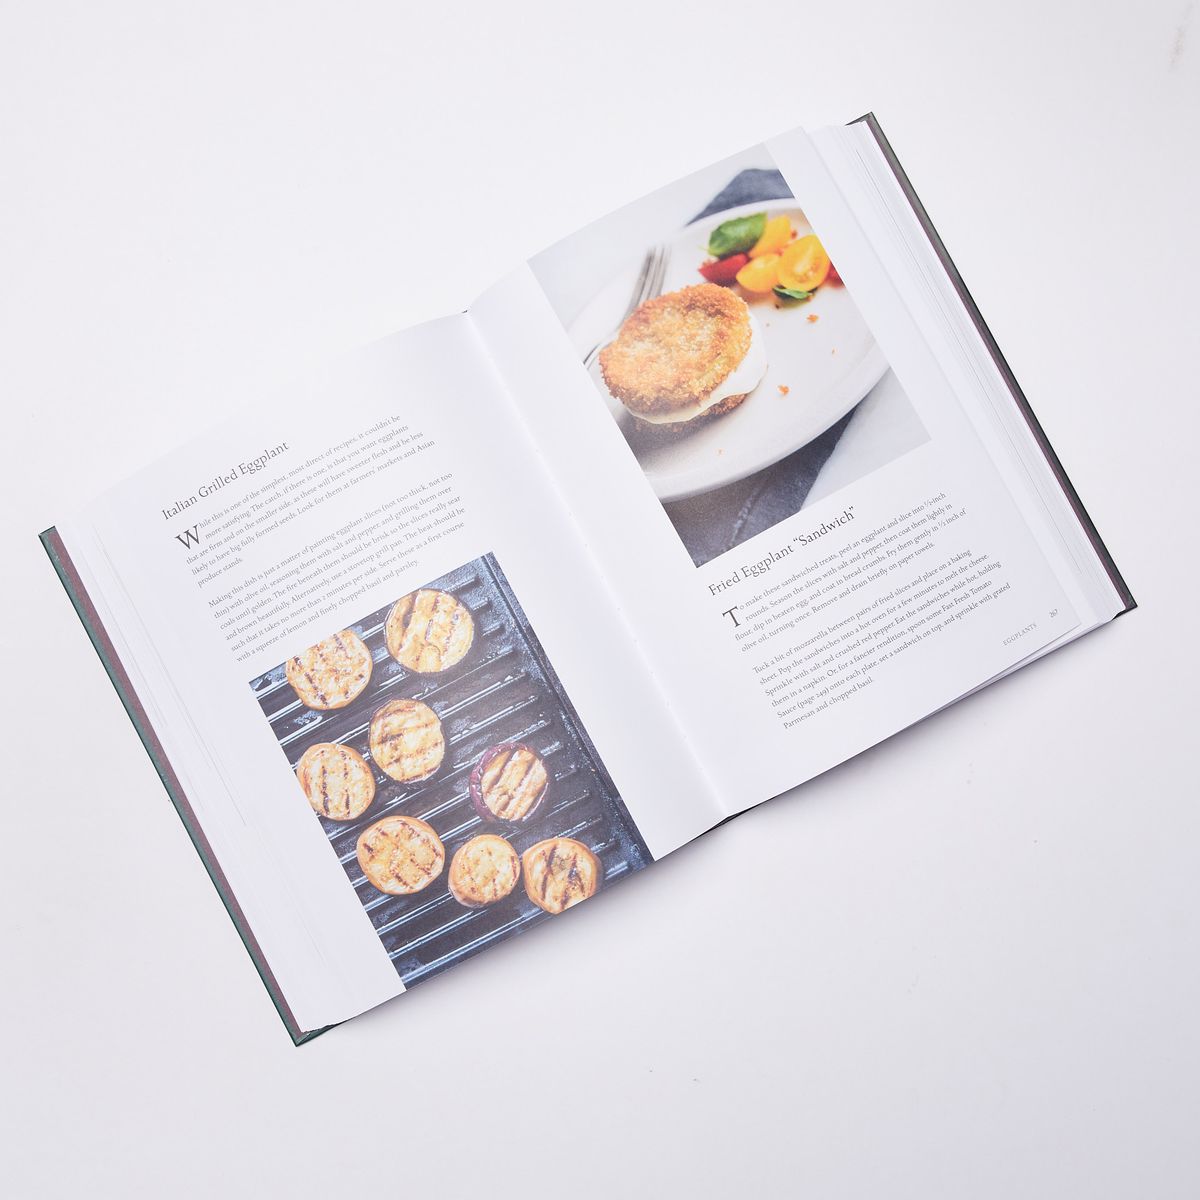 Open cookbook with a photo of grilled eggplant on the left page and fried eggplant on the right